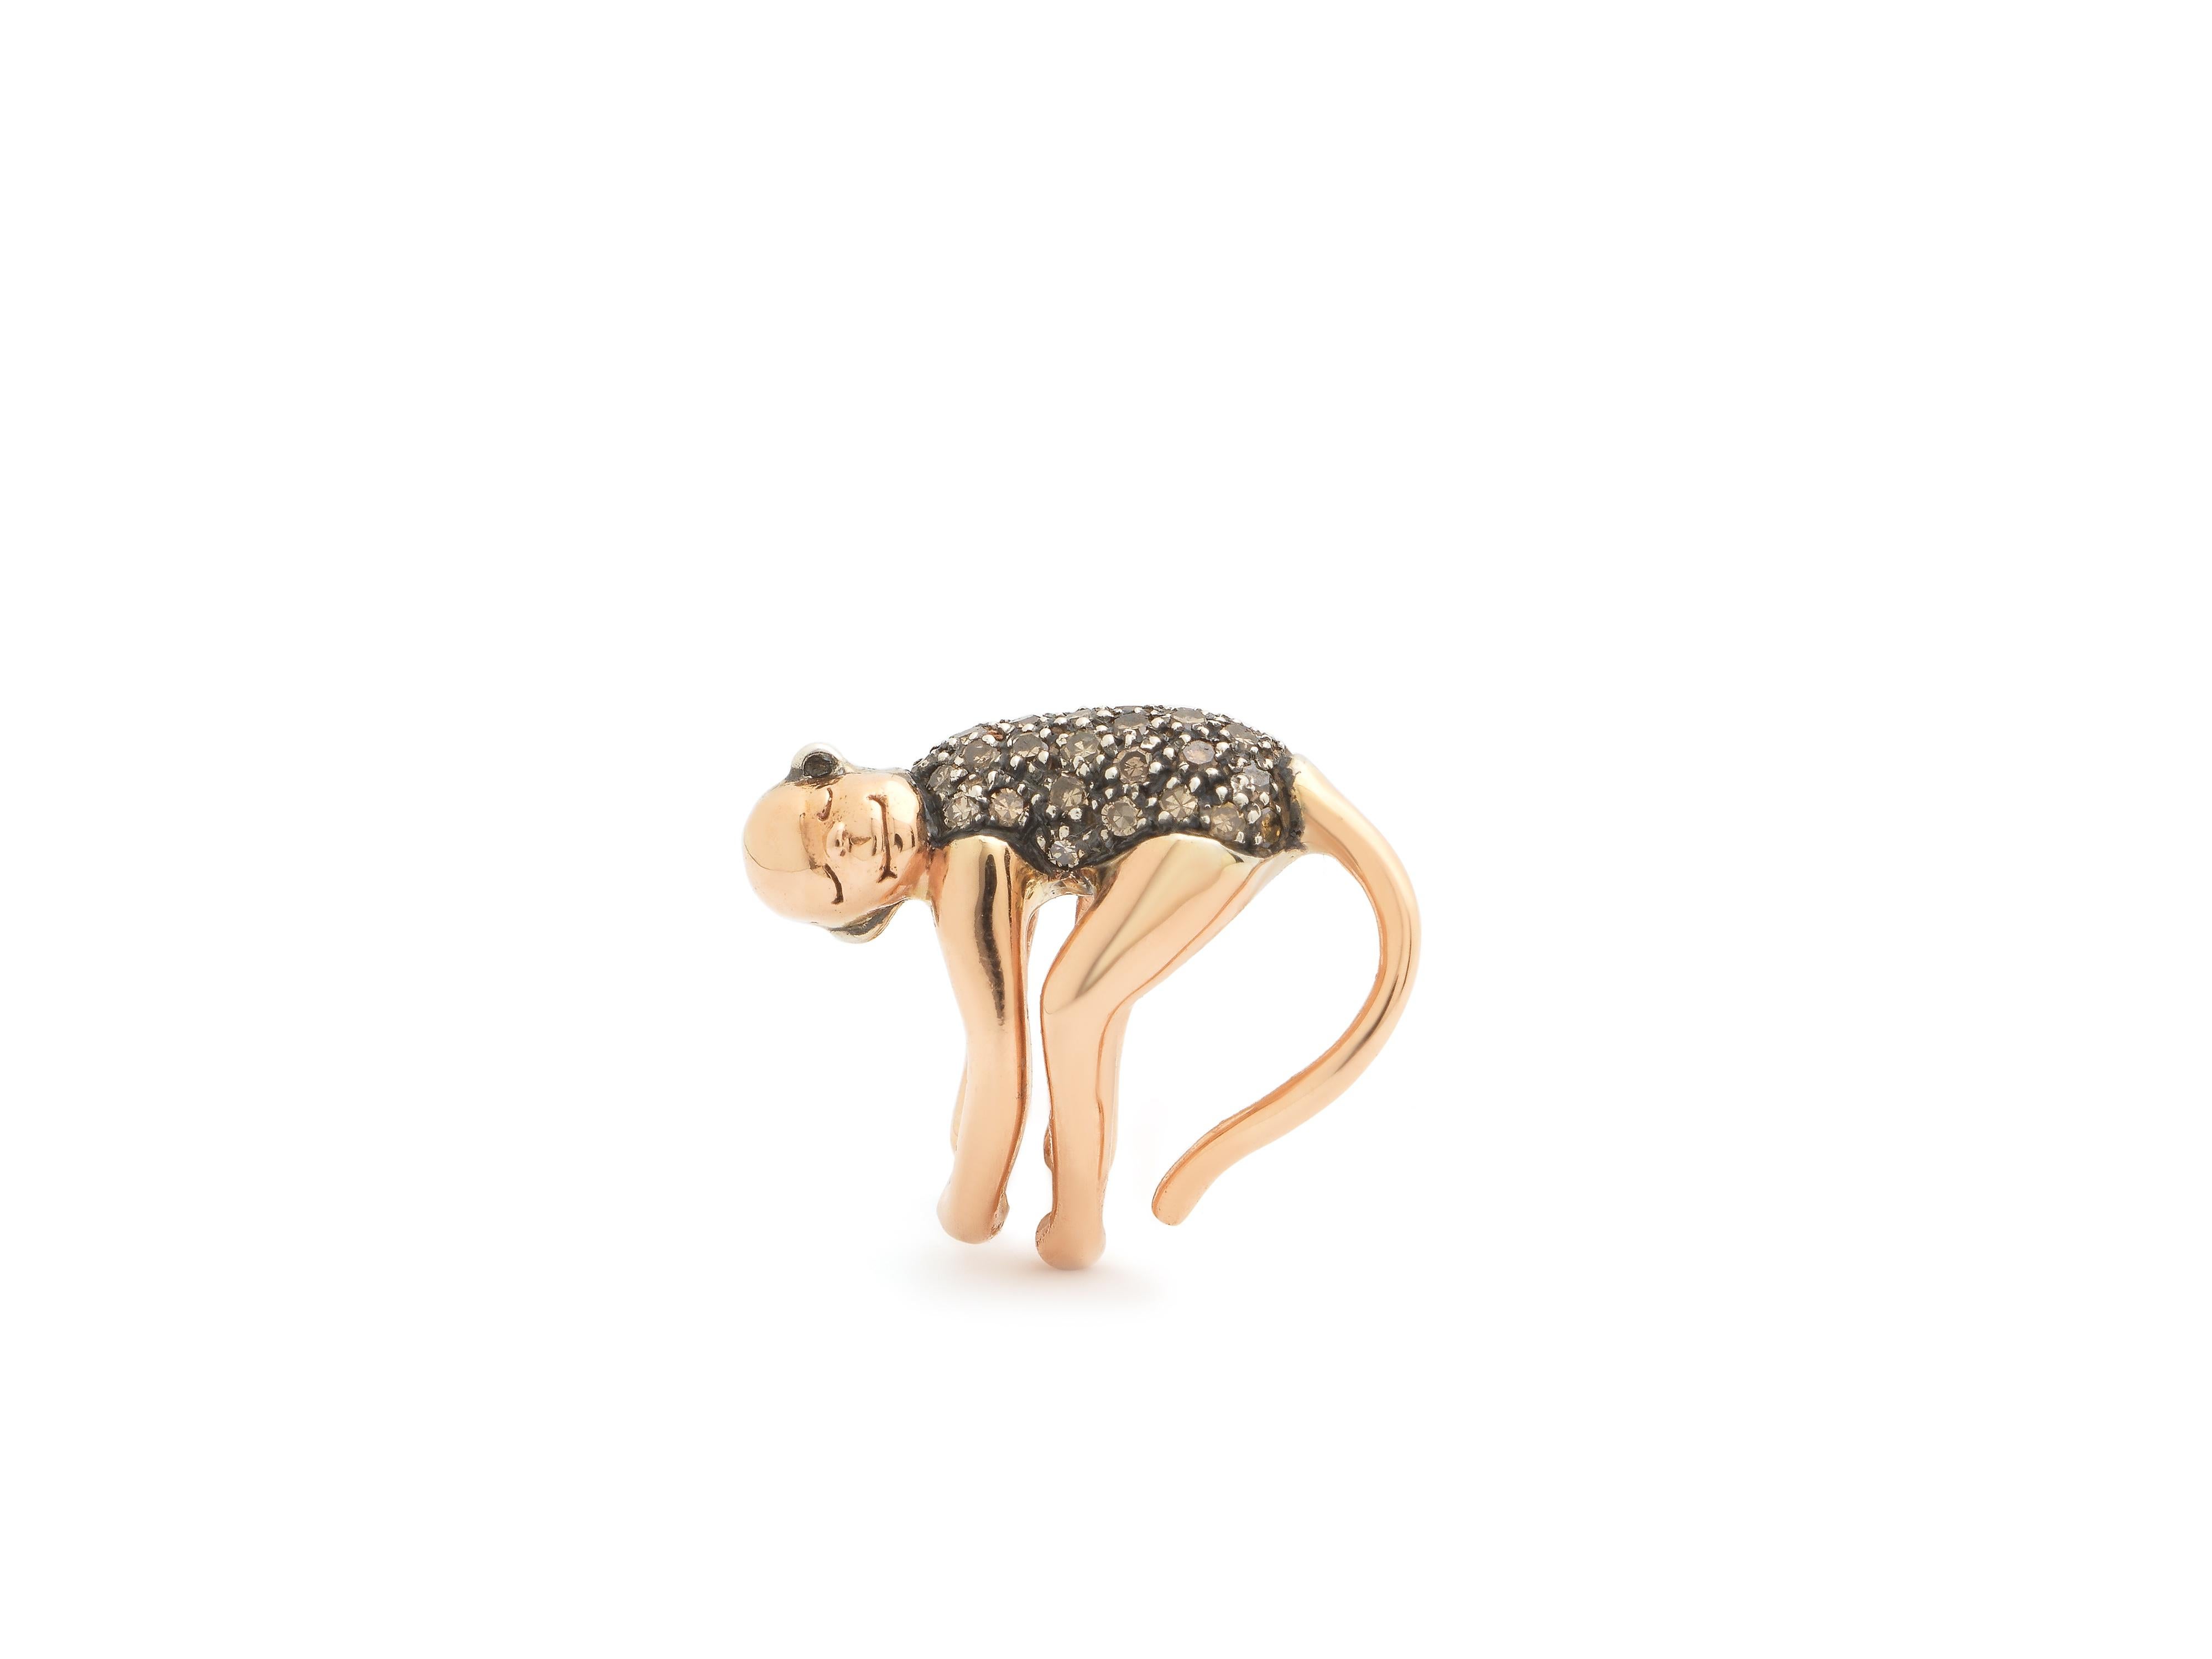 Mimicking a baby monkey’s embrace, the Monkey Ear Hugger grasps onto the rim of the ear. Designed in 18k rose gold and sterling silver, the monkey is embellished with brown diamonds.

Bibi’s Monkey Collection captures the sleek movement and form of